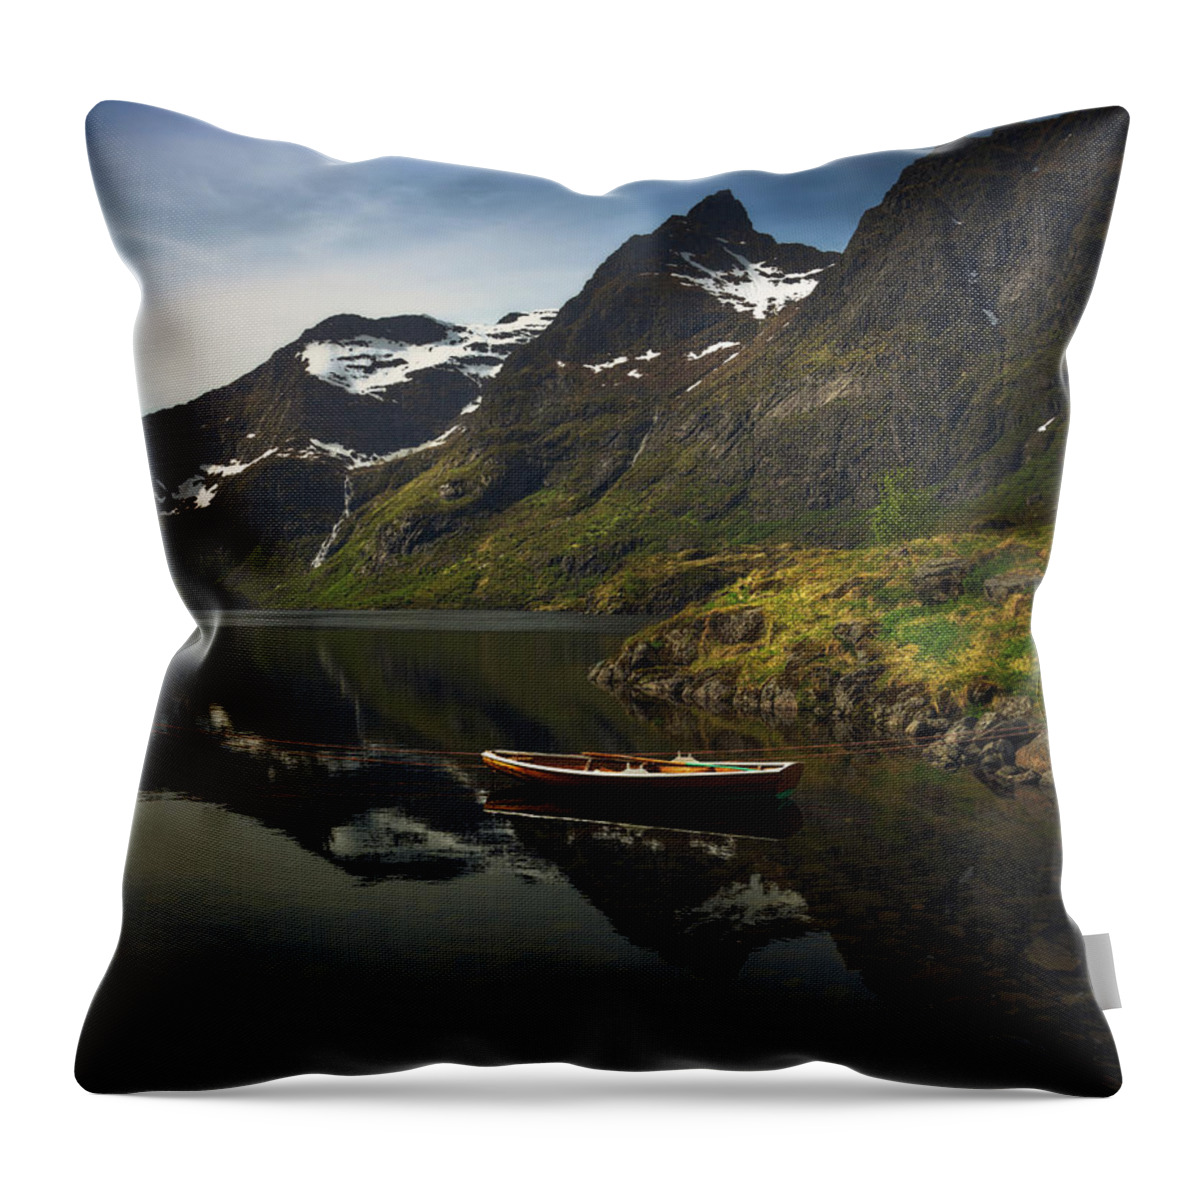 Boat Throw Pillow featuring the photograph Peaceful Lofoten by Tor-Ivar Naess